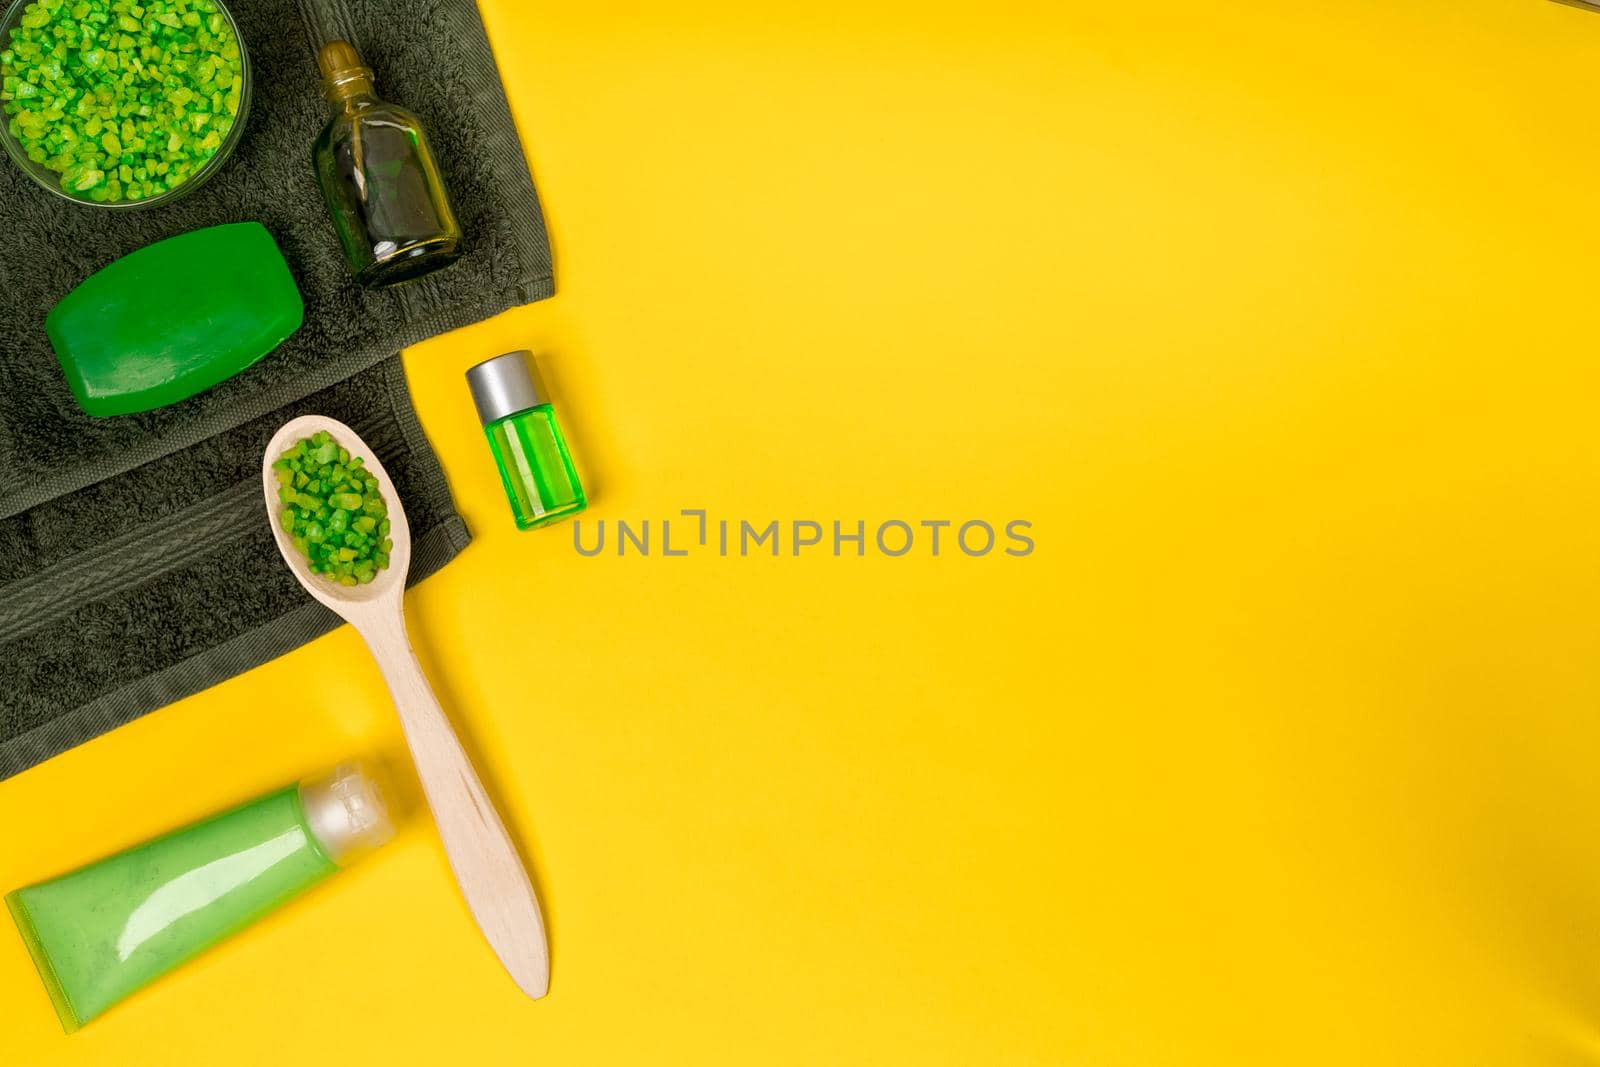 Spa set: soap, mask, oil, sea salt and towel on yellow background. Top view. Still life. Copy space